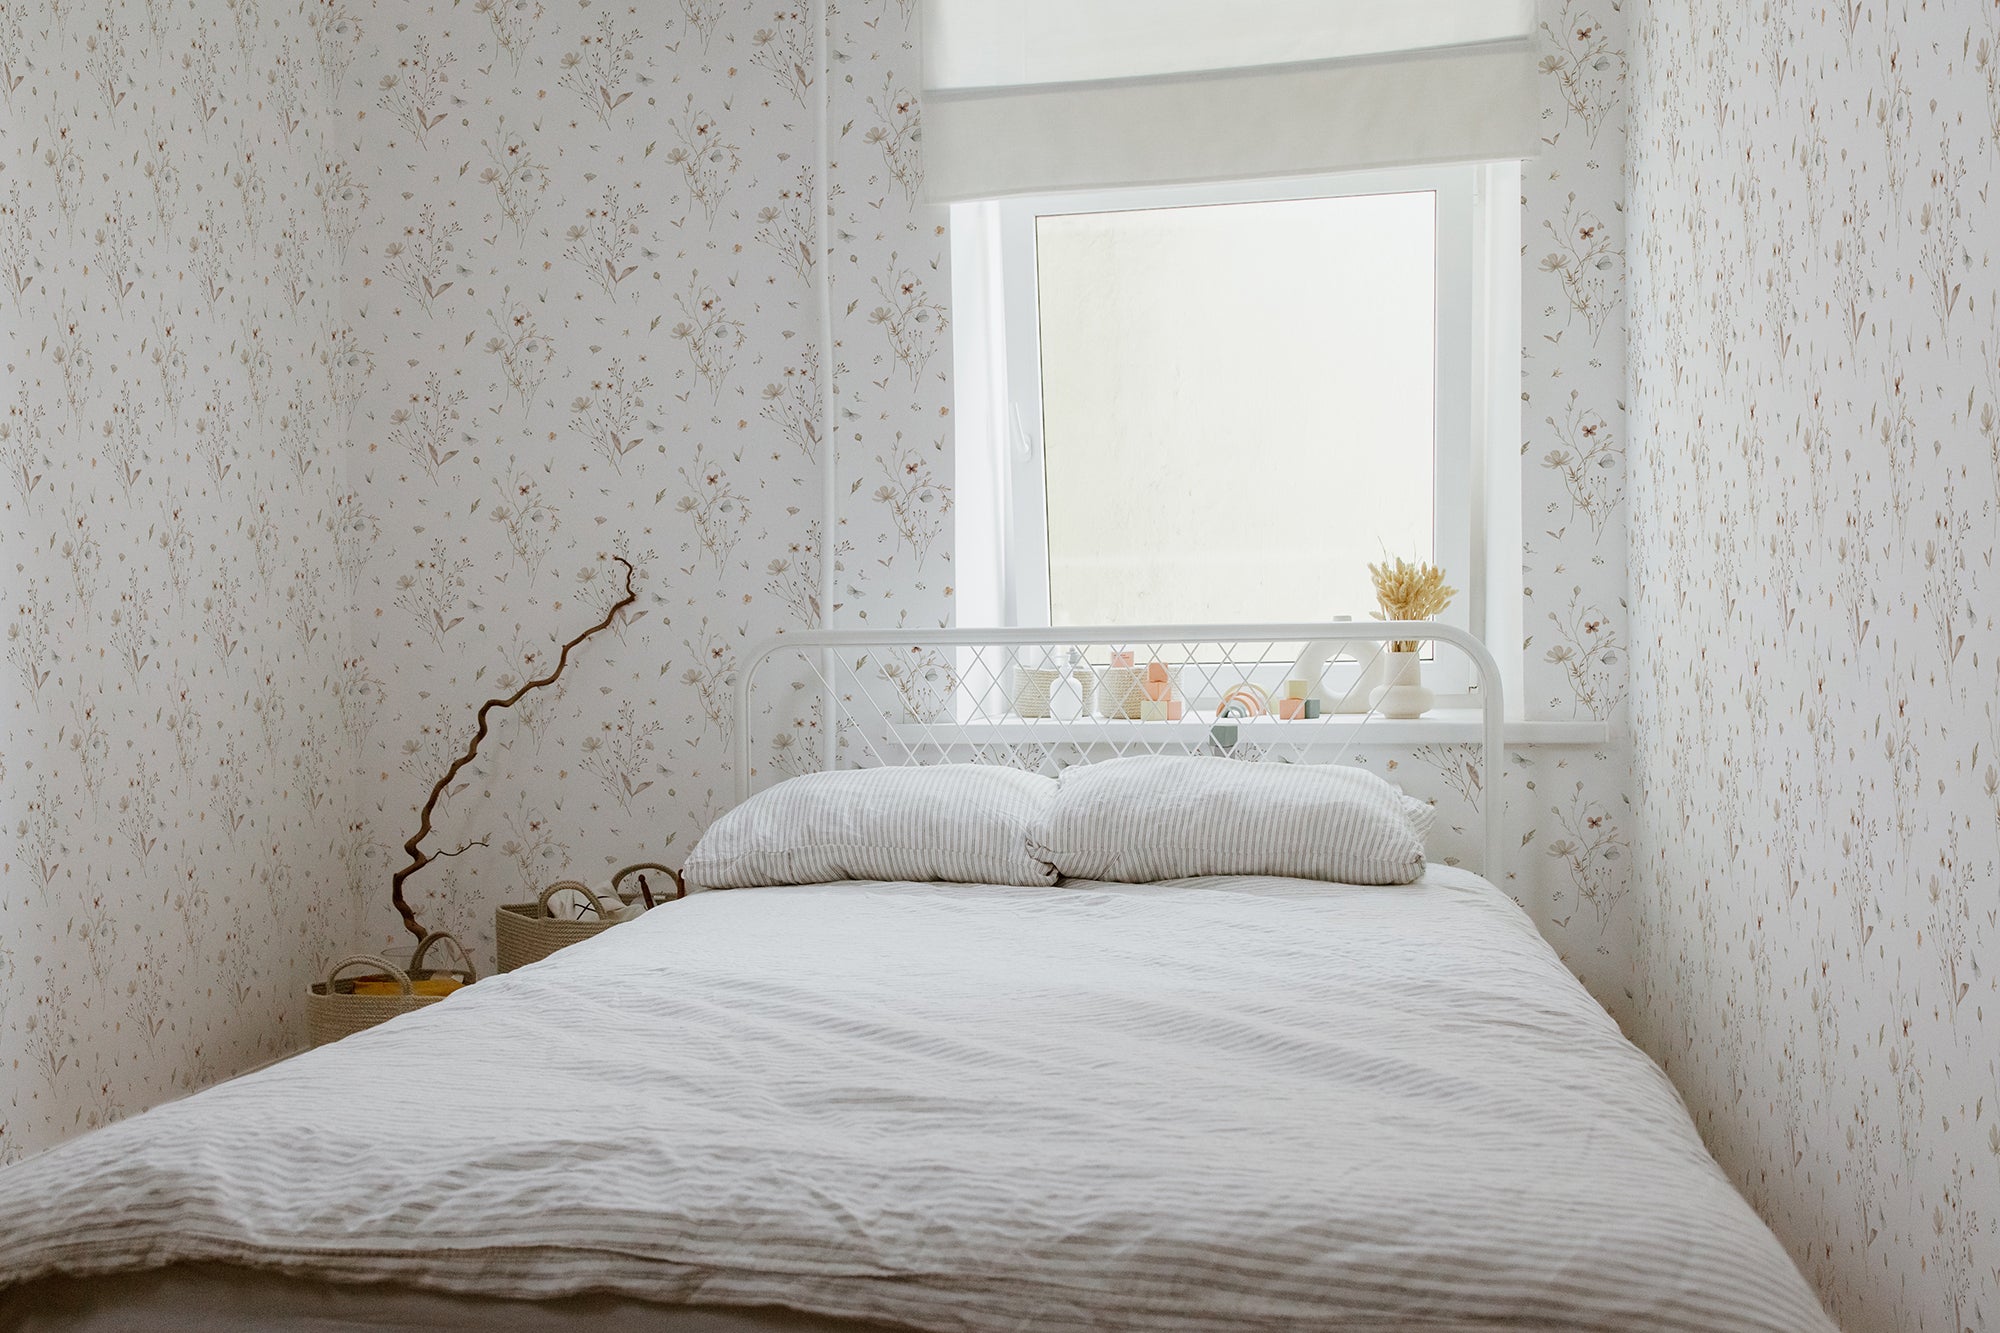 A bright and peaceful bedroom featuring the Tranquil Bloom Wallpaper II. The room is bathed in natural light from a window, highlighting the wallpaper's delicate floral design in soft, muted colors that evoke a feeling of serenity. A white metal bed is neatly made with a beige linen duvet, and a white tray with a small plant is placed by the window, enhancing the room’s tranquil vibe.